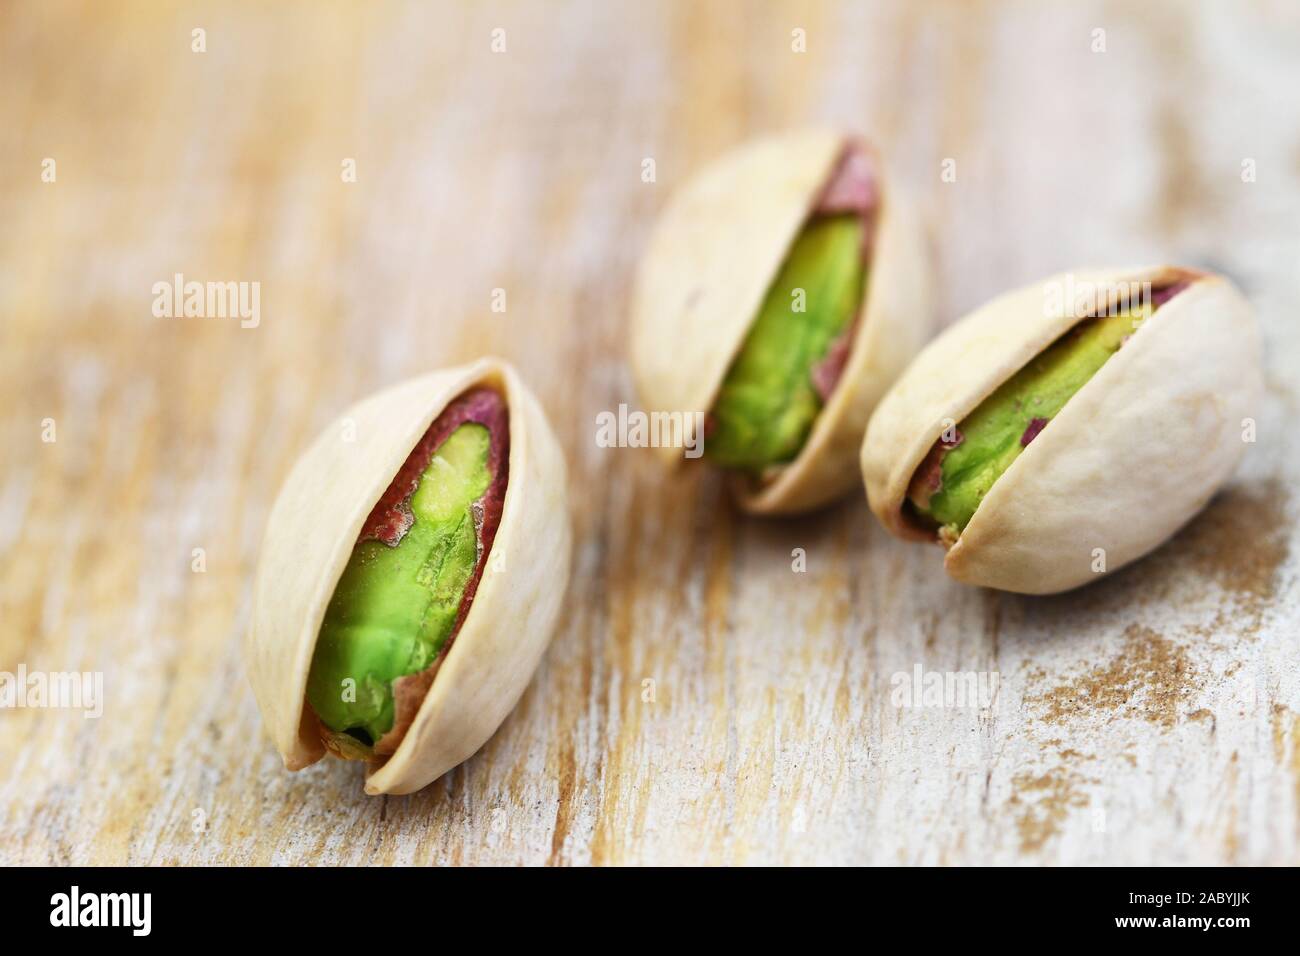 Pistachio nuts on rustic wooden surface, closeup Stock Photo